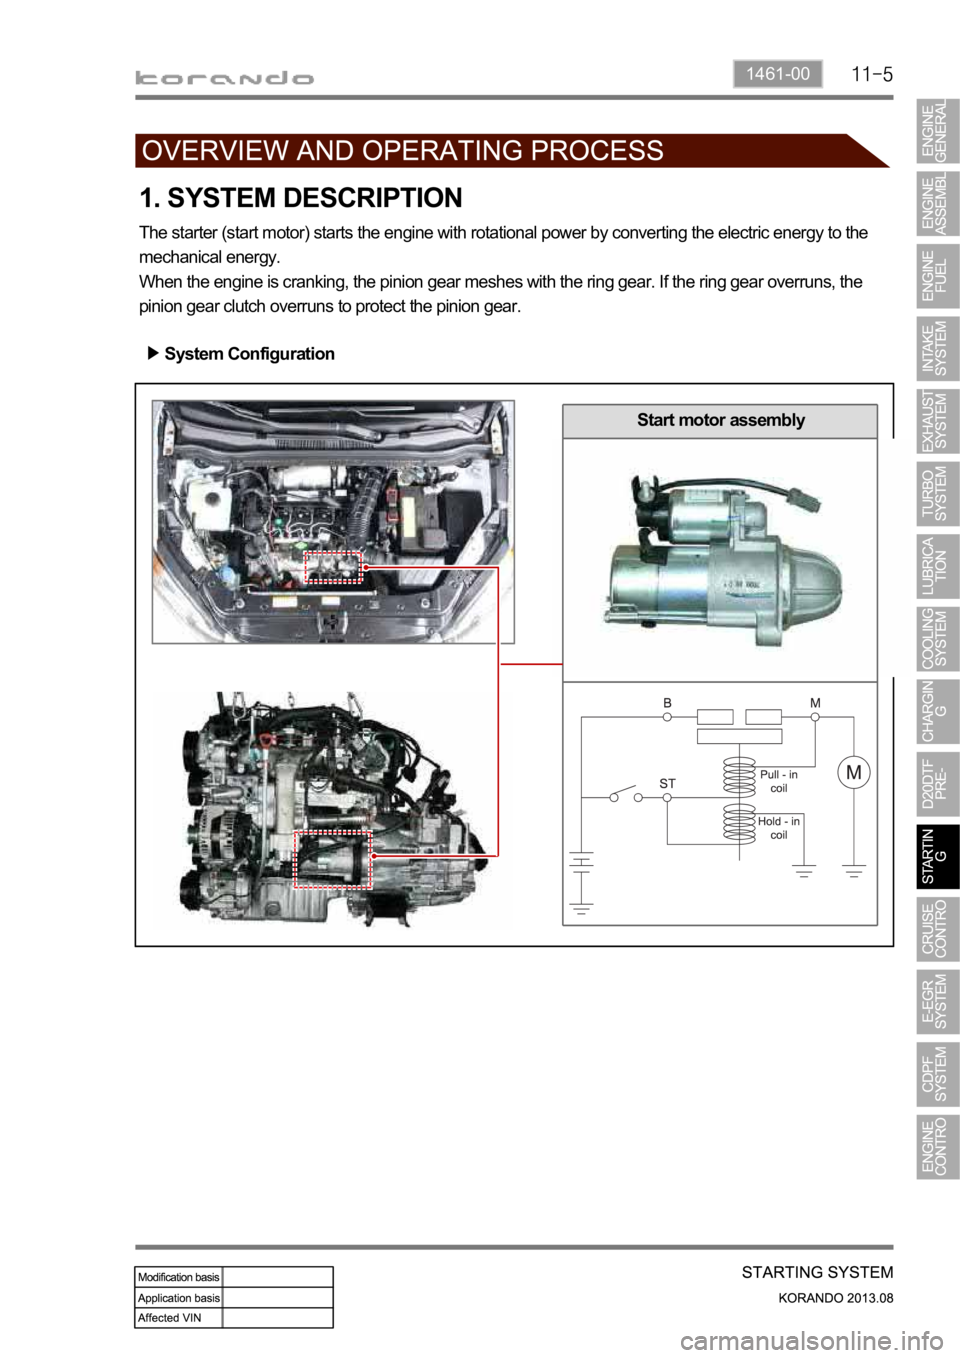 SSANGYONG KORANDO 2013  Service Manual 1461-00
Start motor assembly
1. SYSTEM DESCRIPTION
The starter (start motor) starts the engine with rotational power by converting the electric energy to the 
mechanical energy.
When the engine is cra